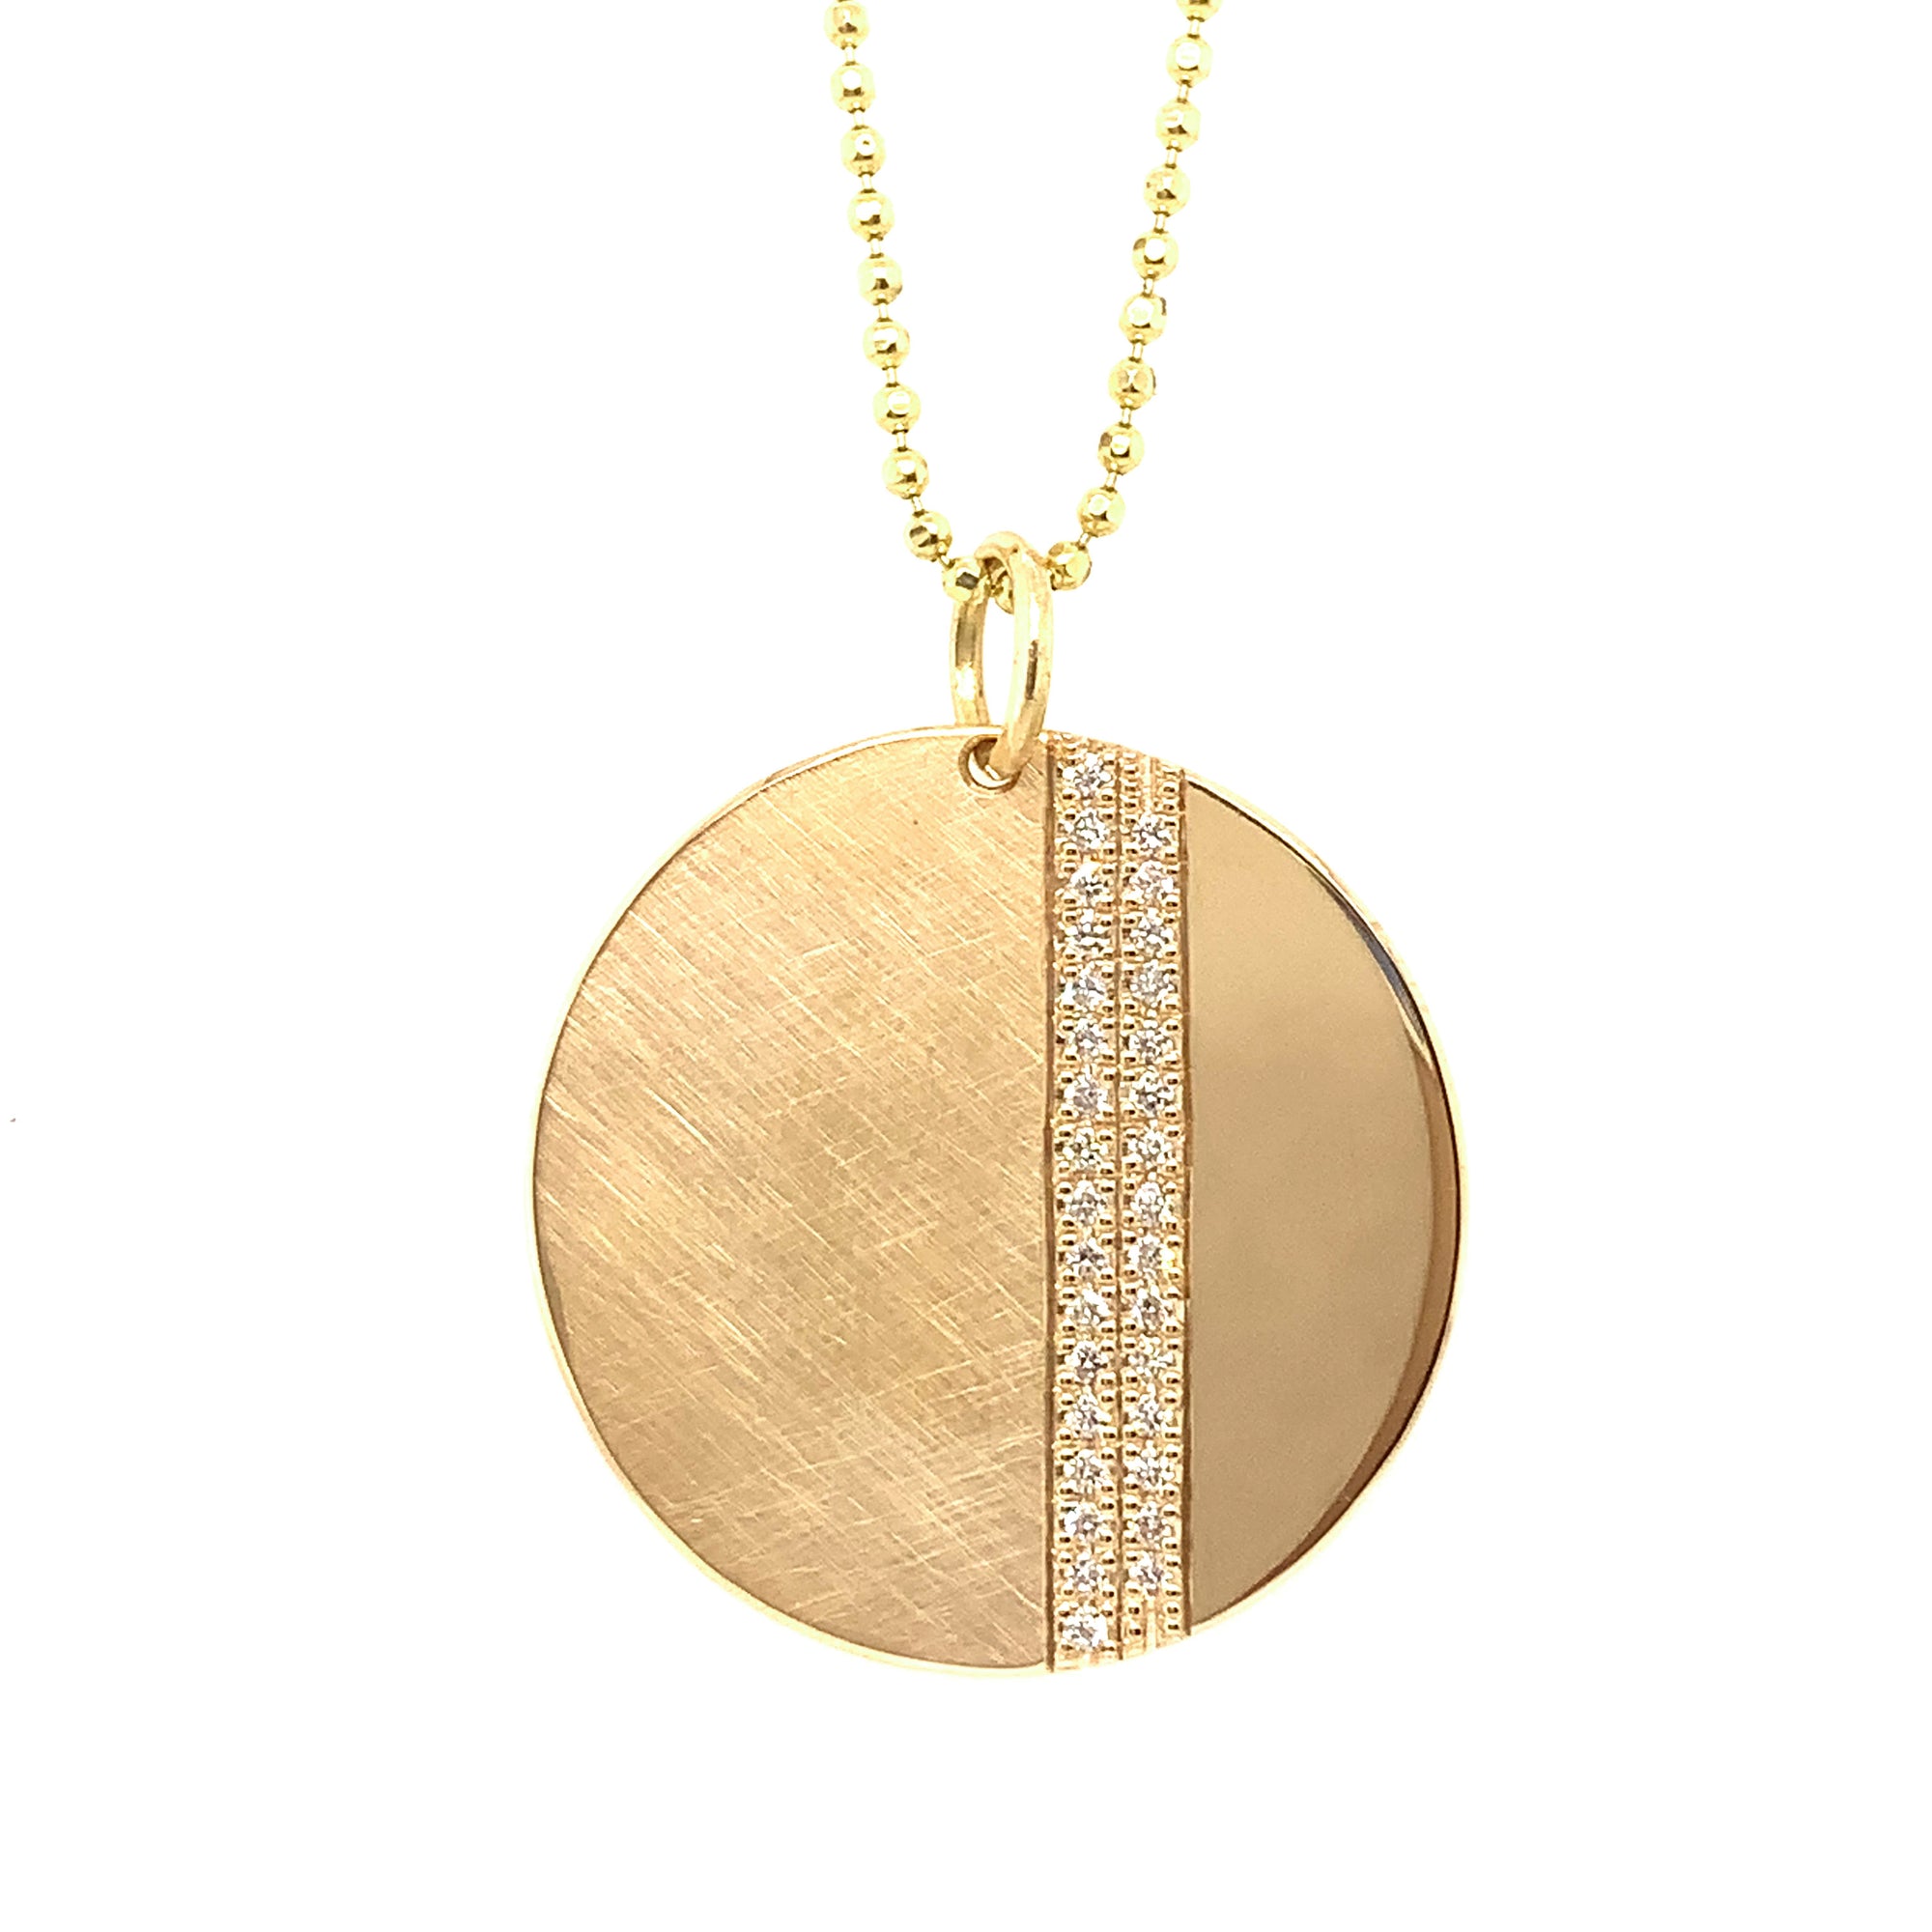 14k yellow gold x-large JOMA round medallion with complimenting satin and shiny finish with 2 vertical stripes of white diamonds